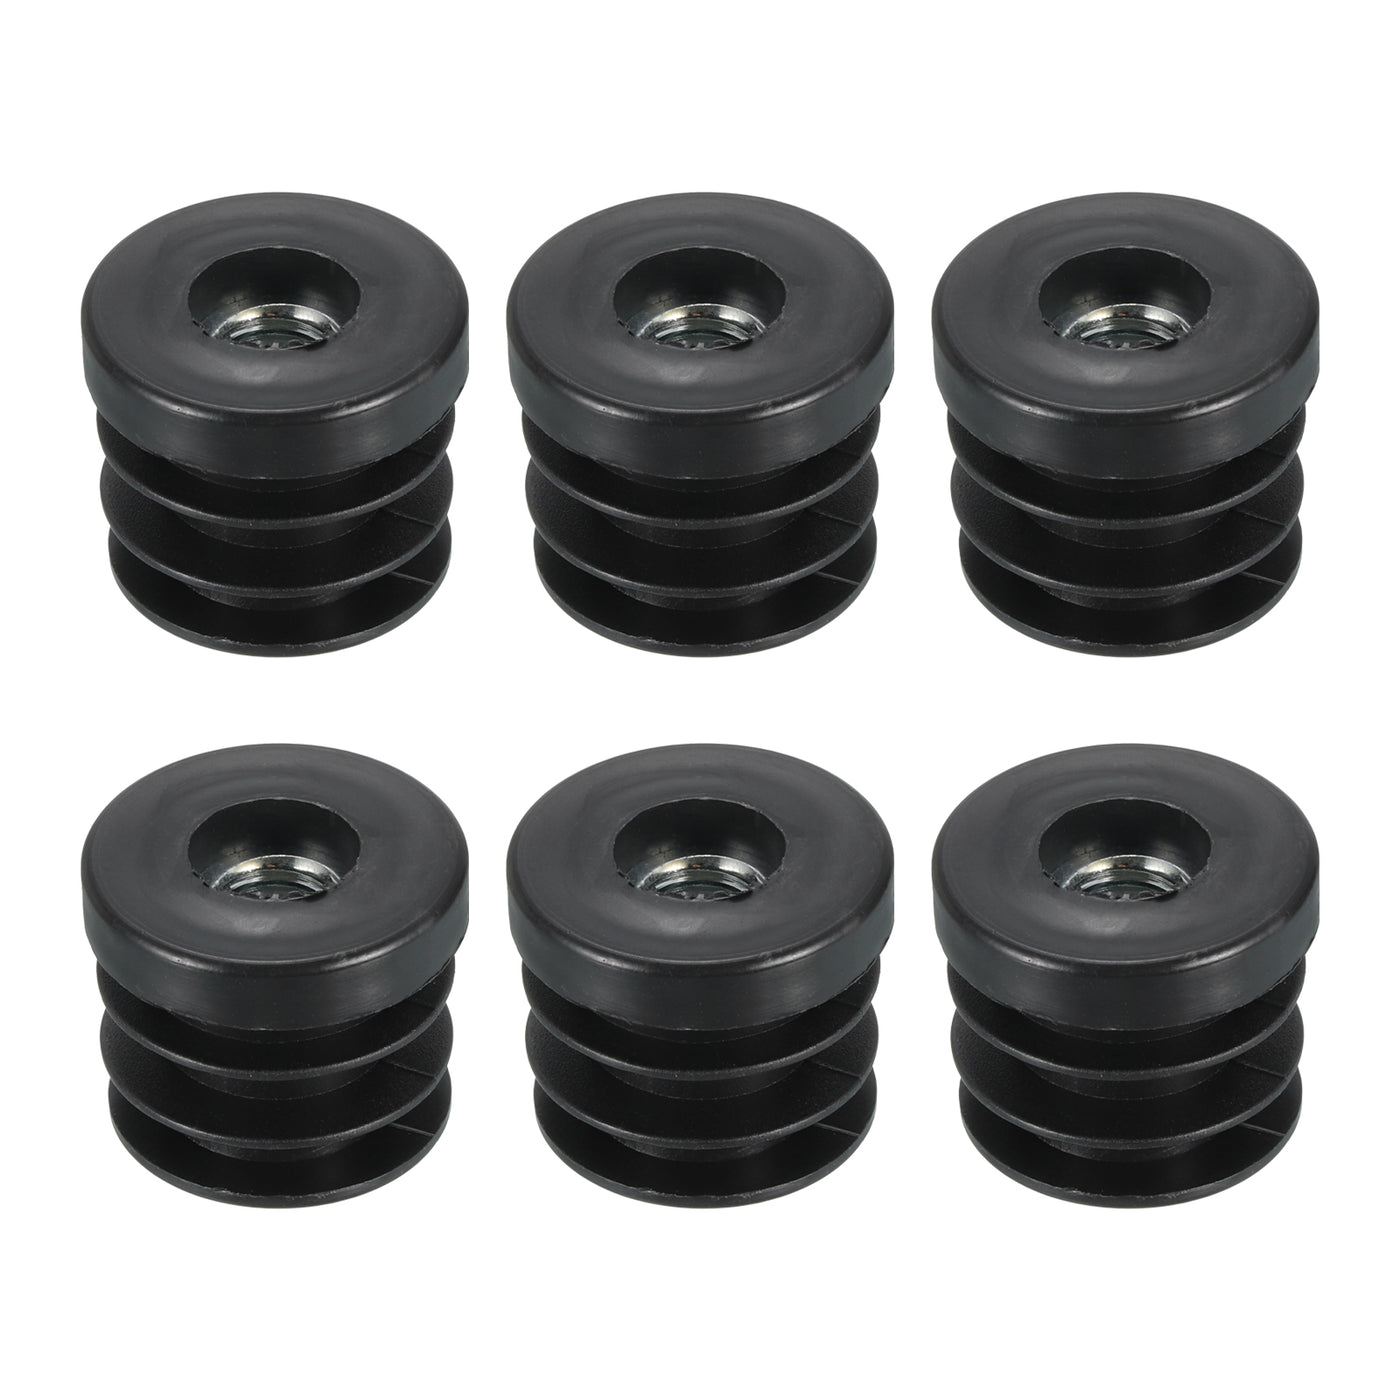 uxcell Uxcell 6Pcs Caster Insert with Thread, 30mm/1.18" M10 Thread for Furniture